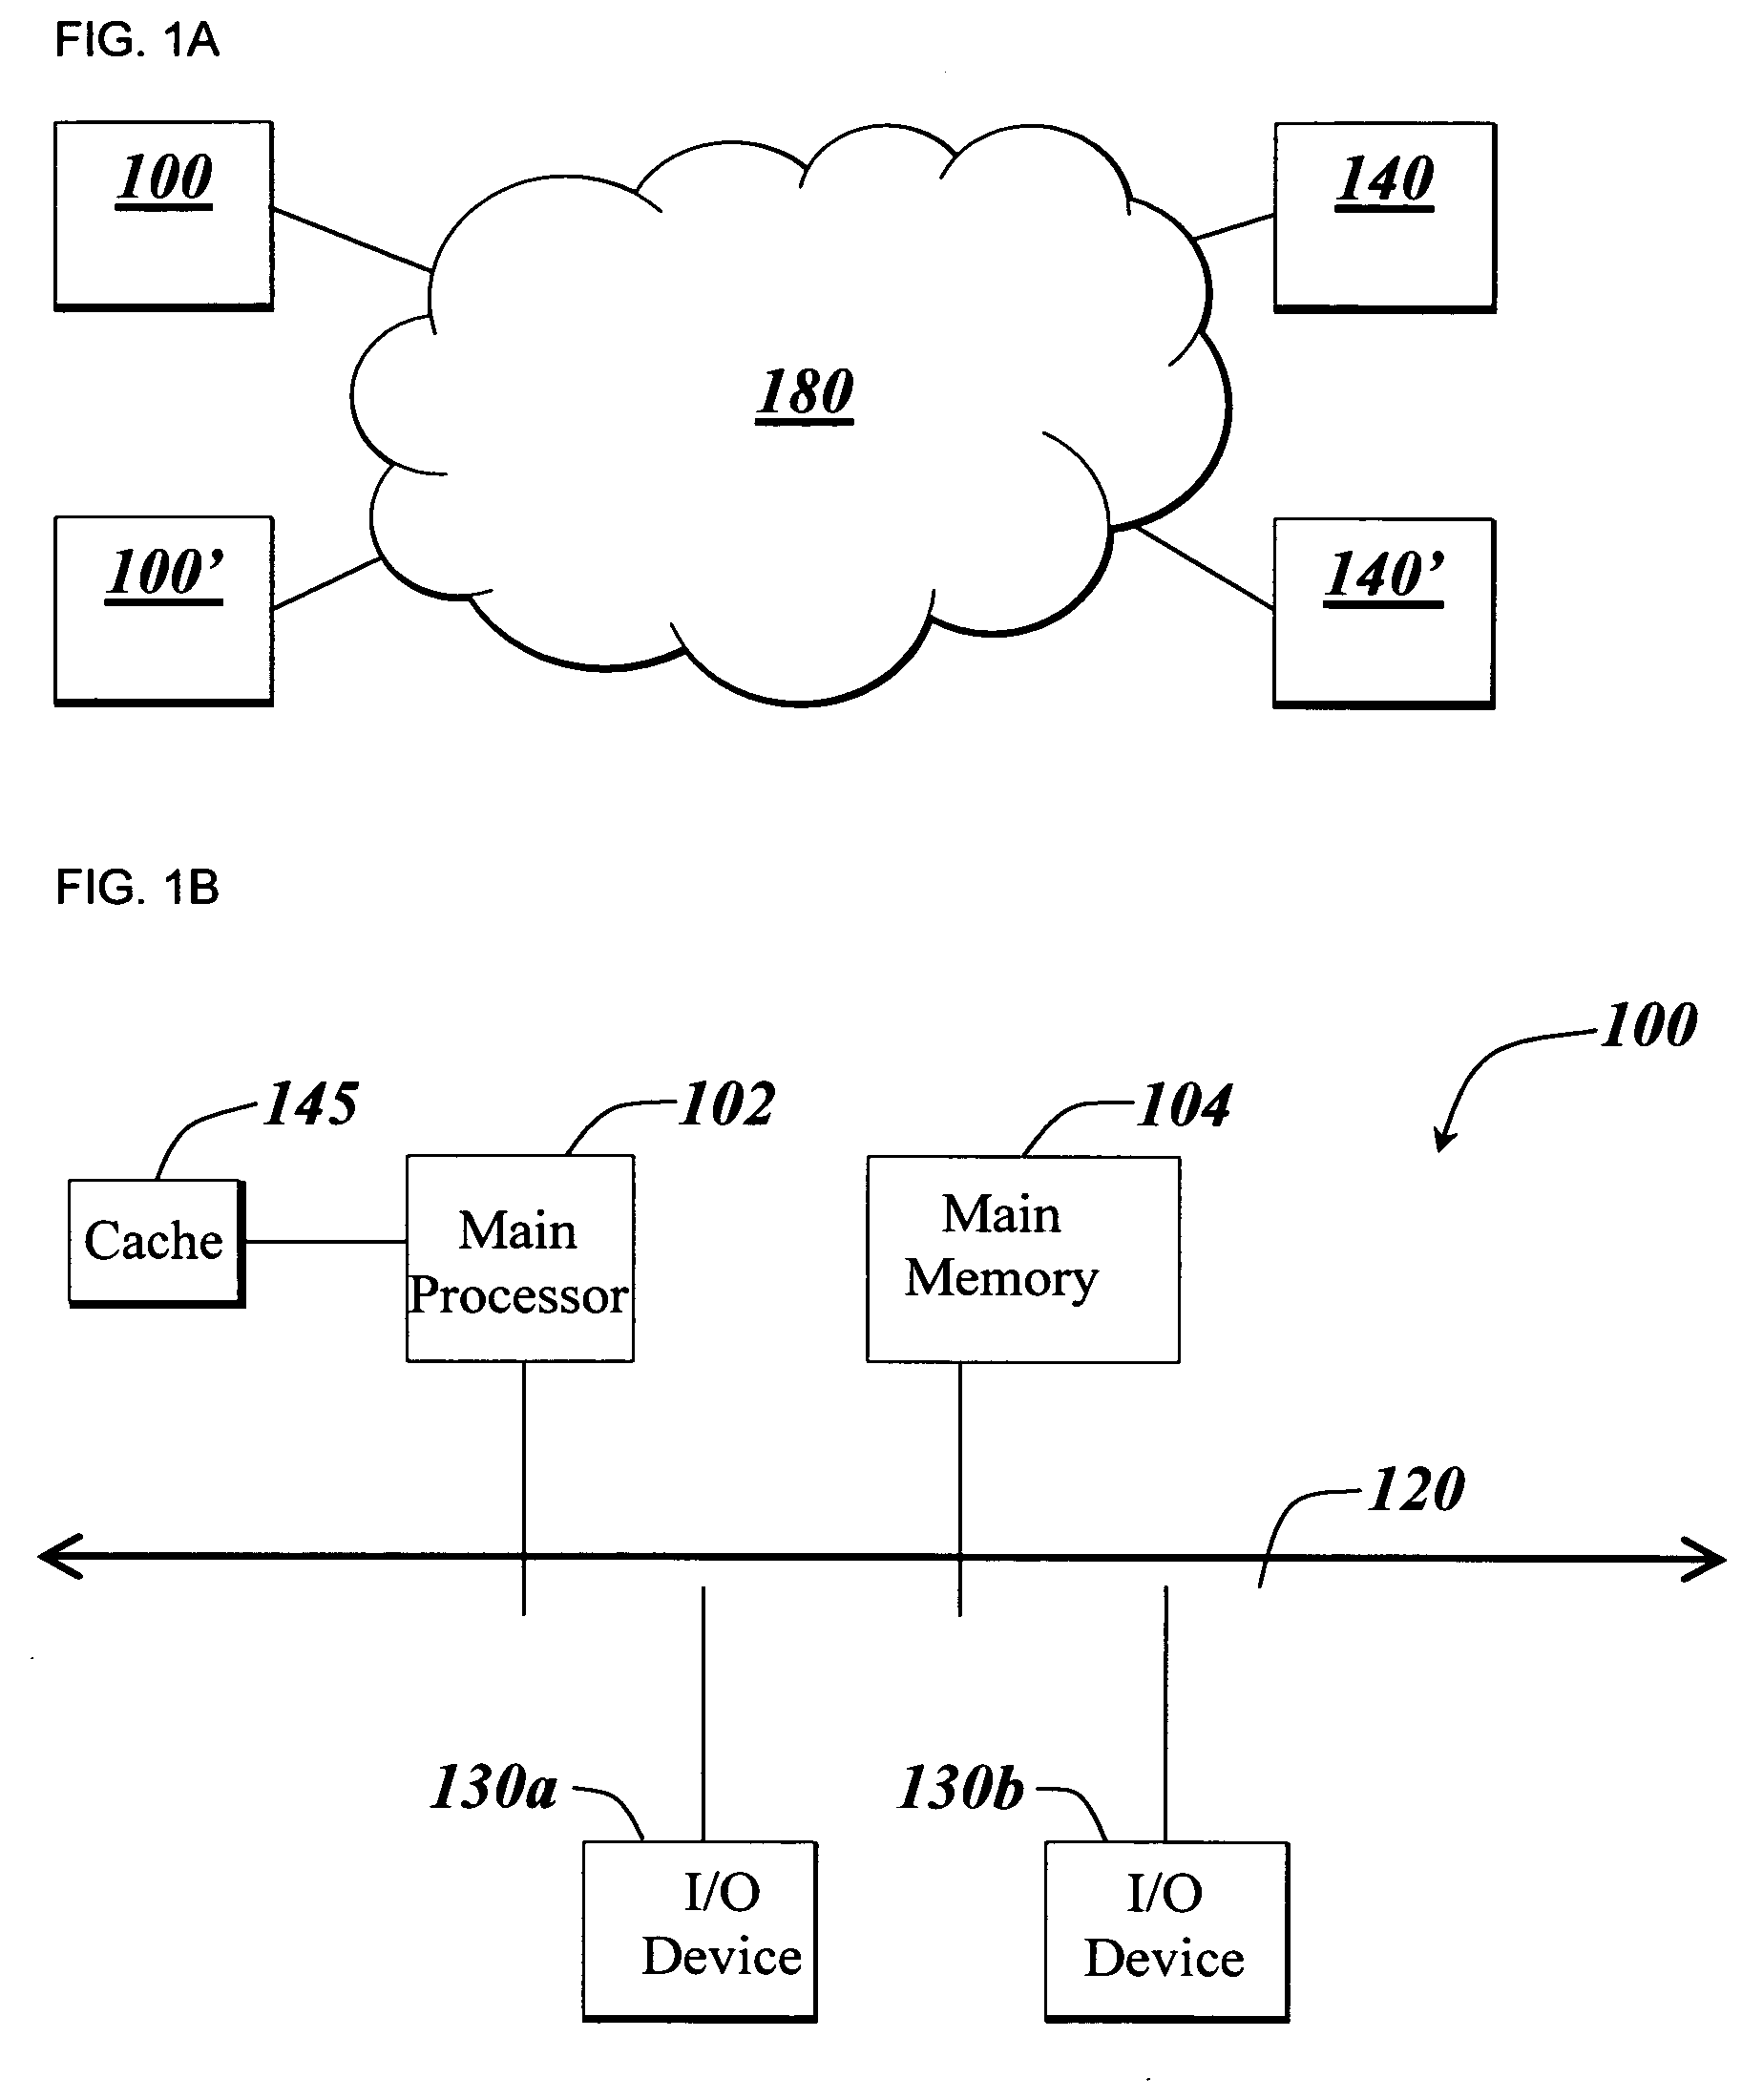 System and methods for automatic time-warped playback in rendering a recorded computer session